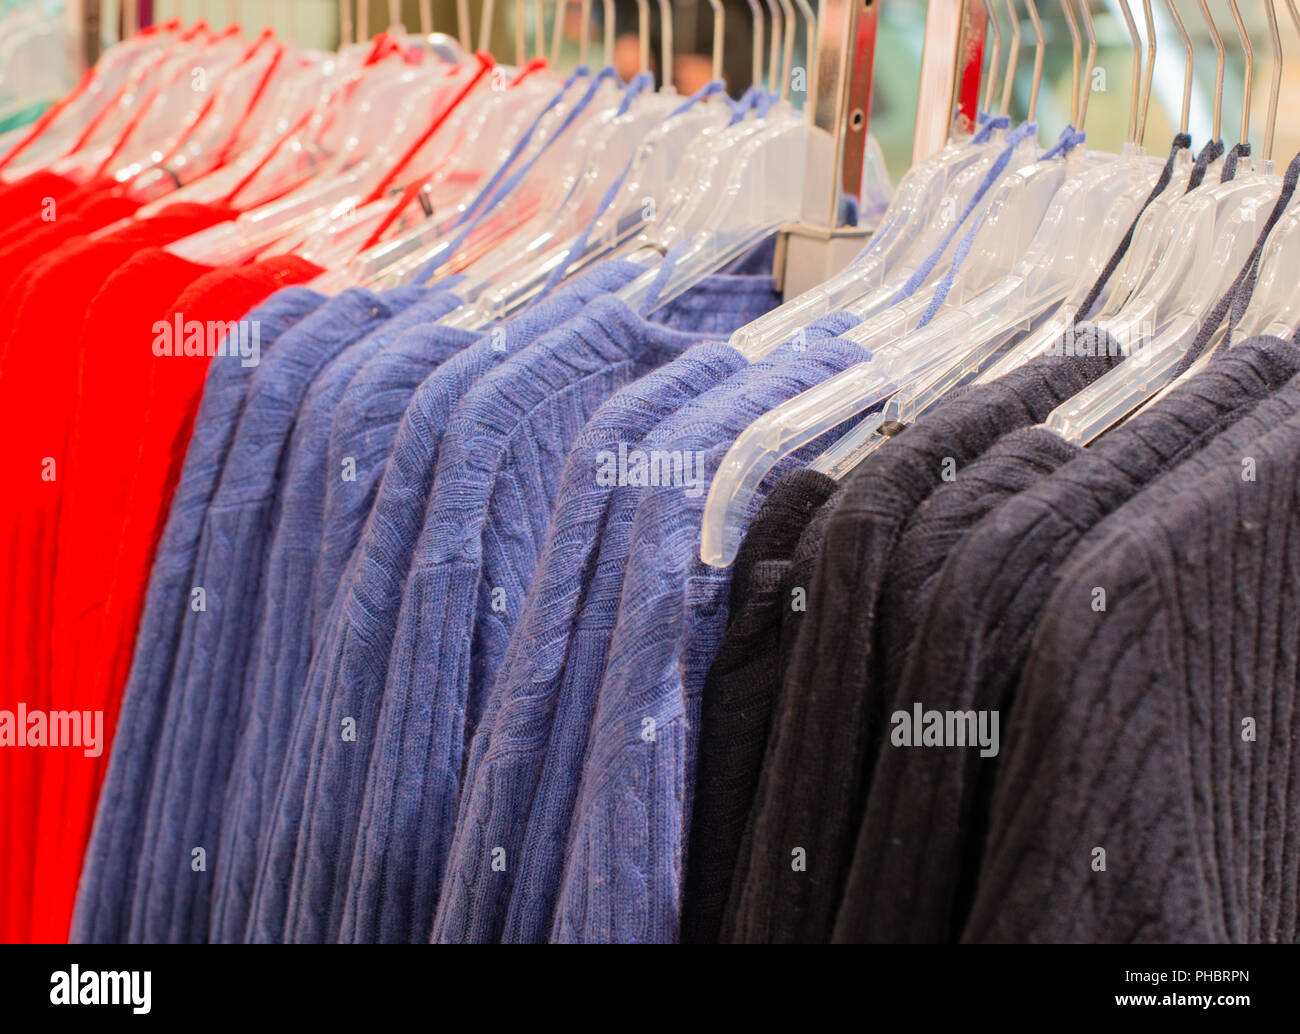 Colorful cashmere sweater on a clothes rack Stock Photo